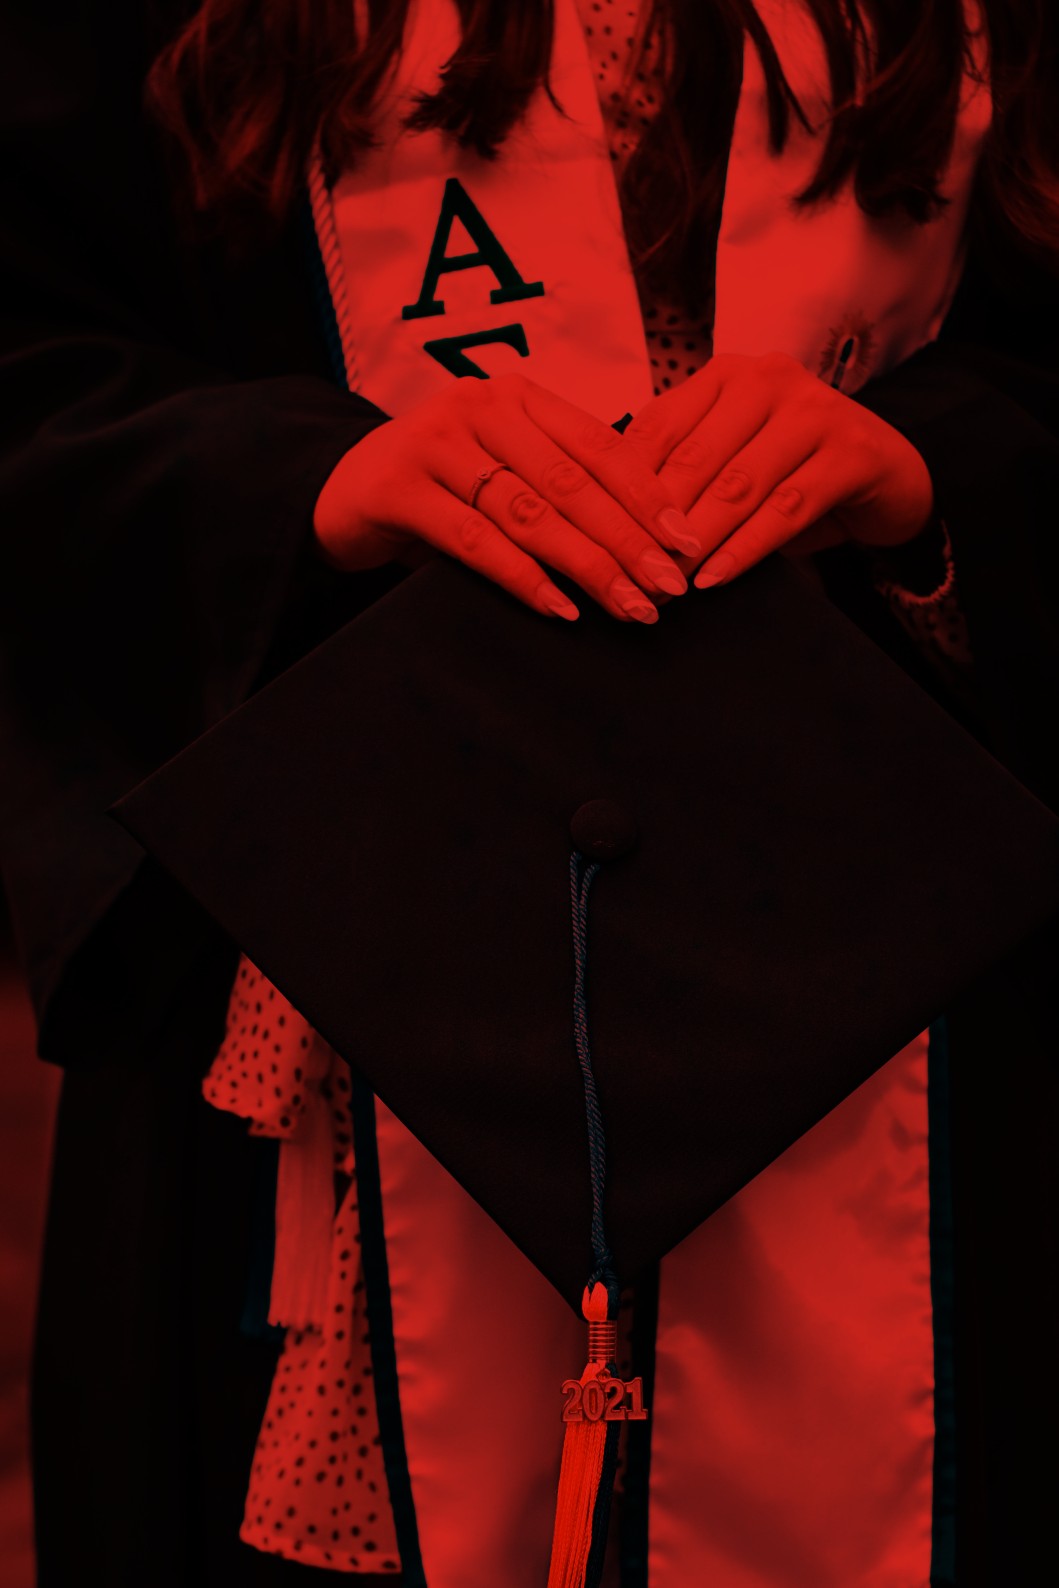 Student holding her mortarboard hat